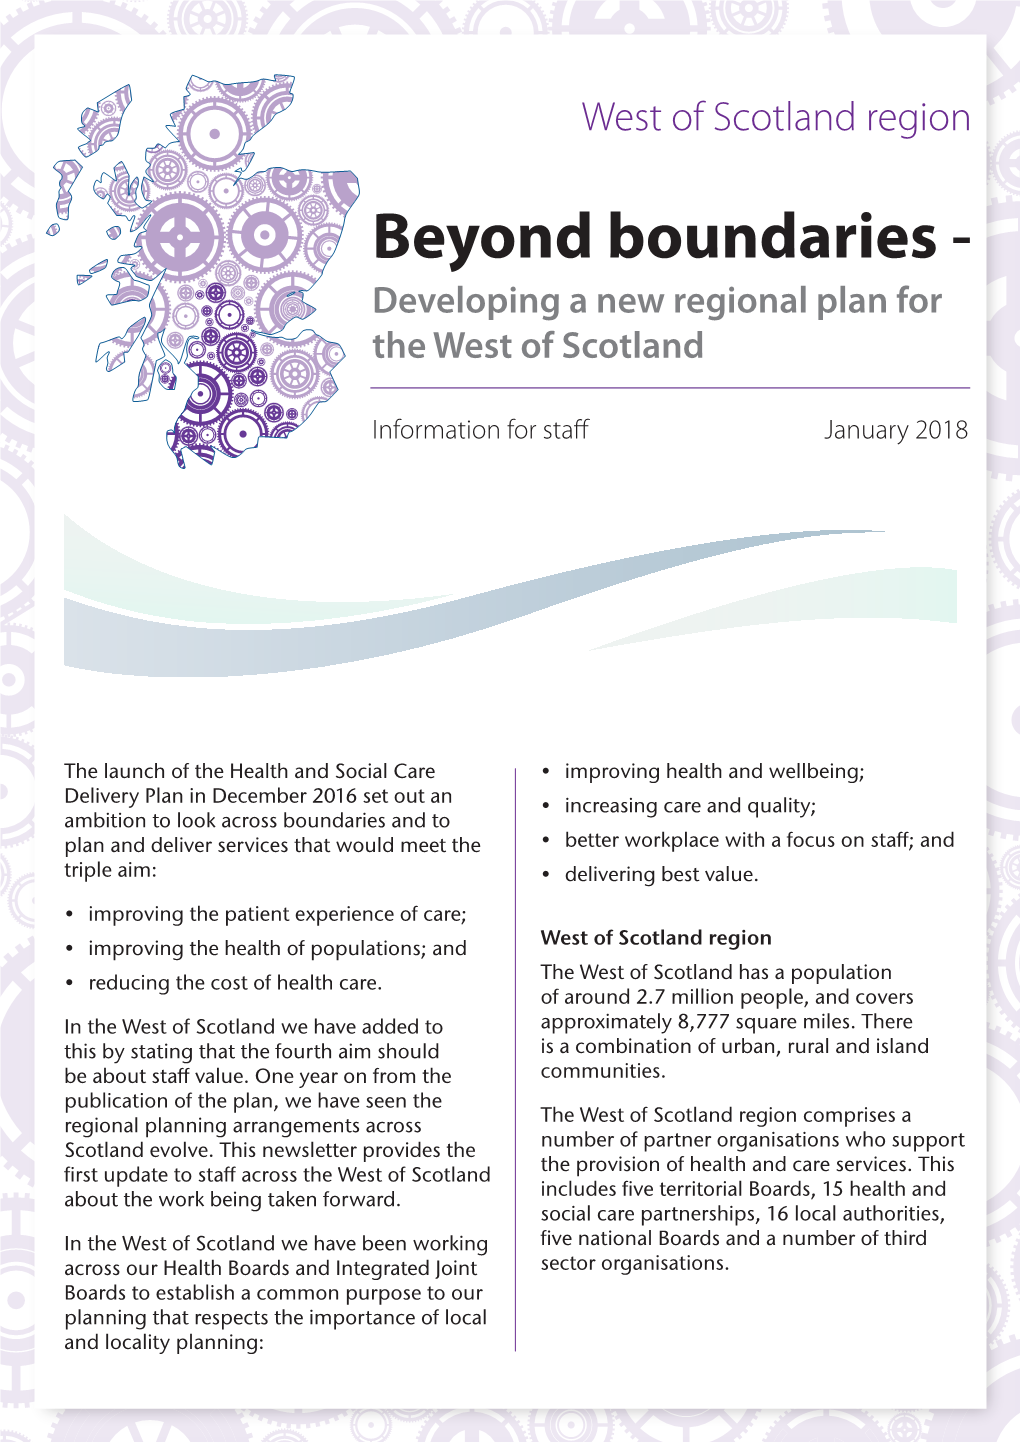 Beyond Boundaries - Developing a New Regional Plan for the West of Scotland